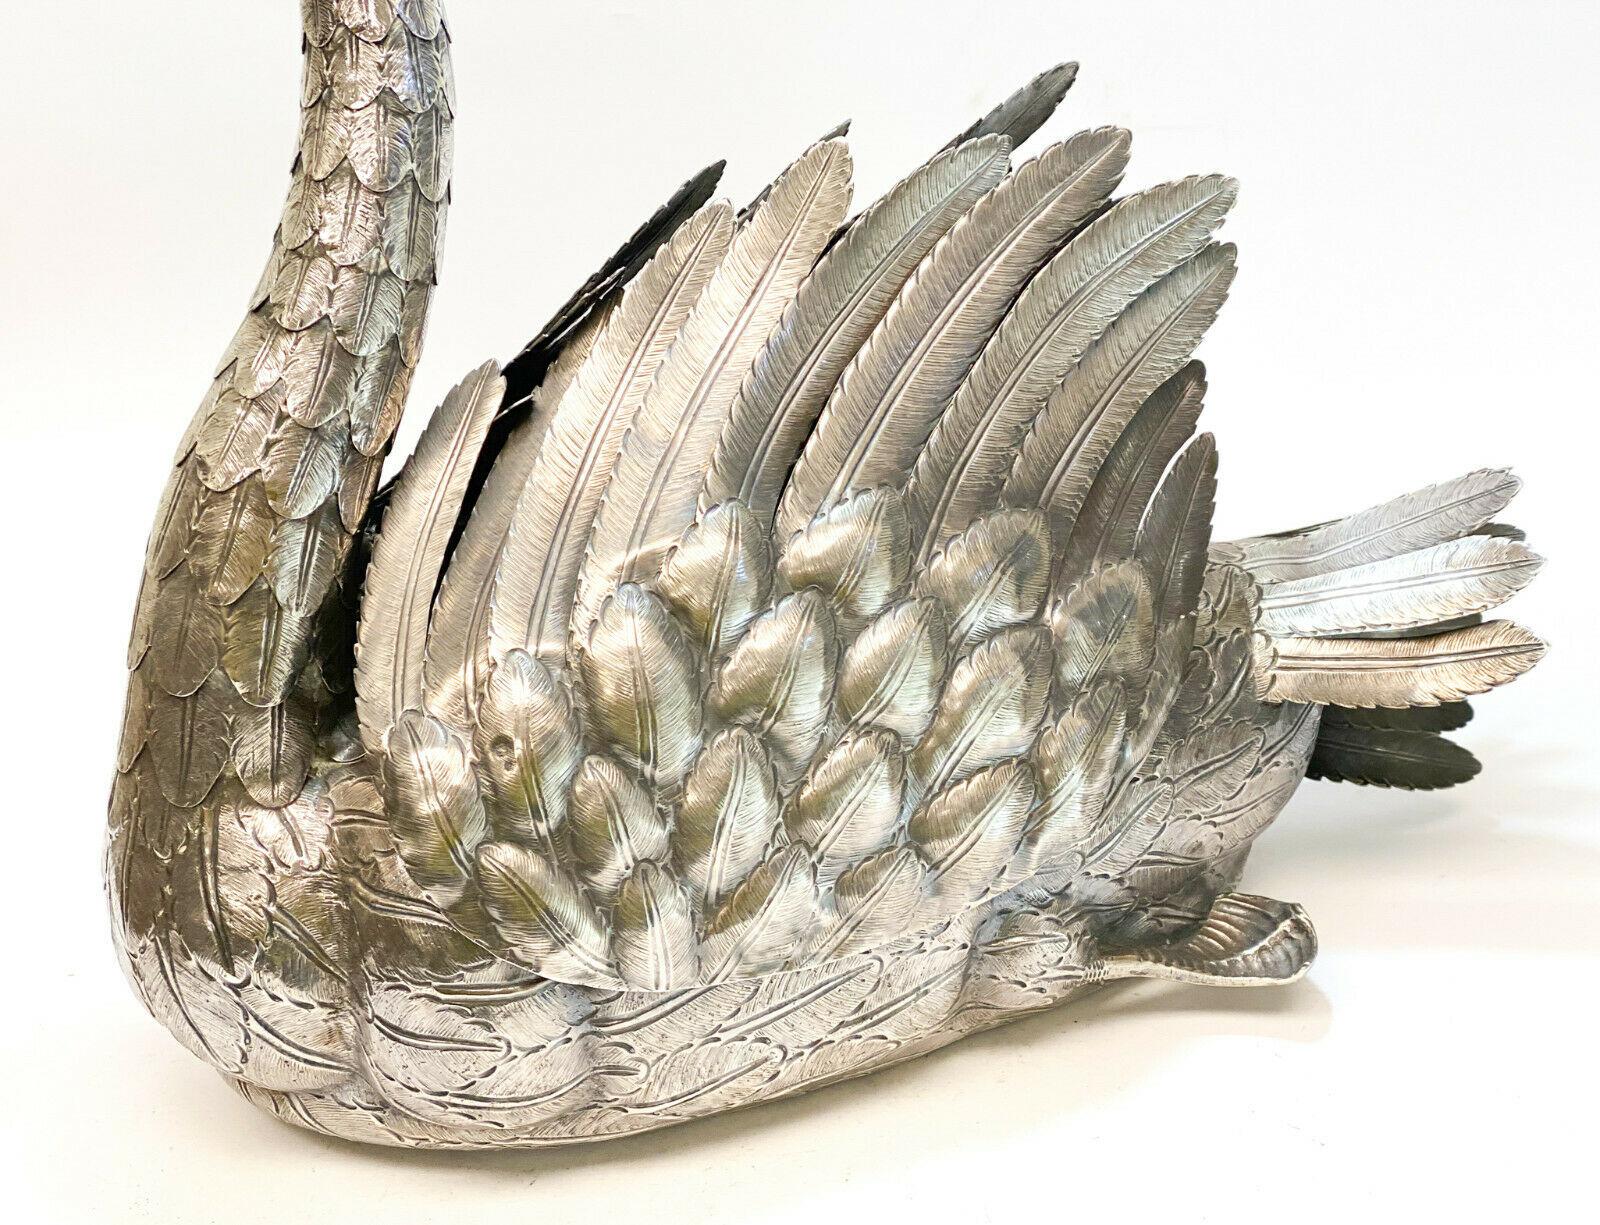 Luiz & David Ferreira Porto 833 silver articulated centerpiece swan bowl jardinière. Intricate hand chased feathers throughout the figural swan. An articulated neck and moveable wings. Marked David Ferreira and 